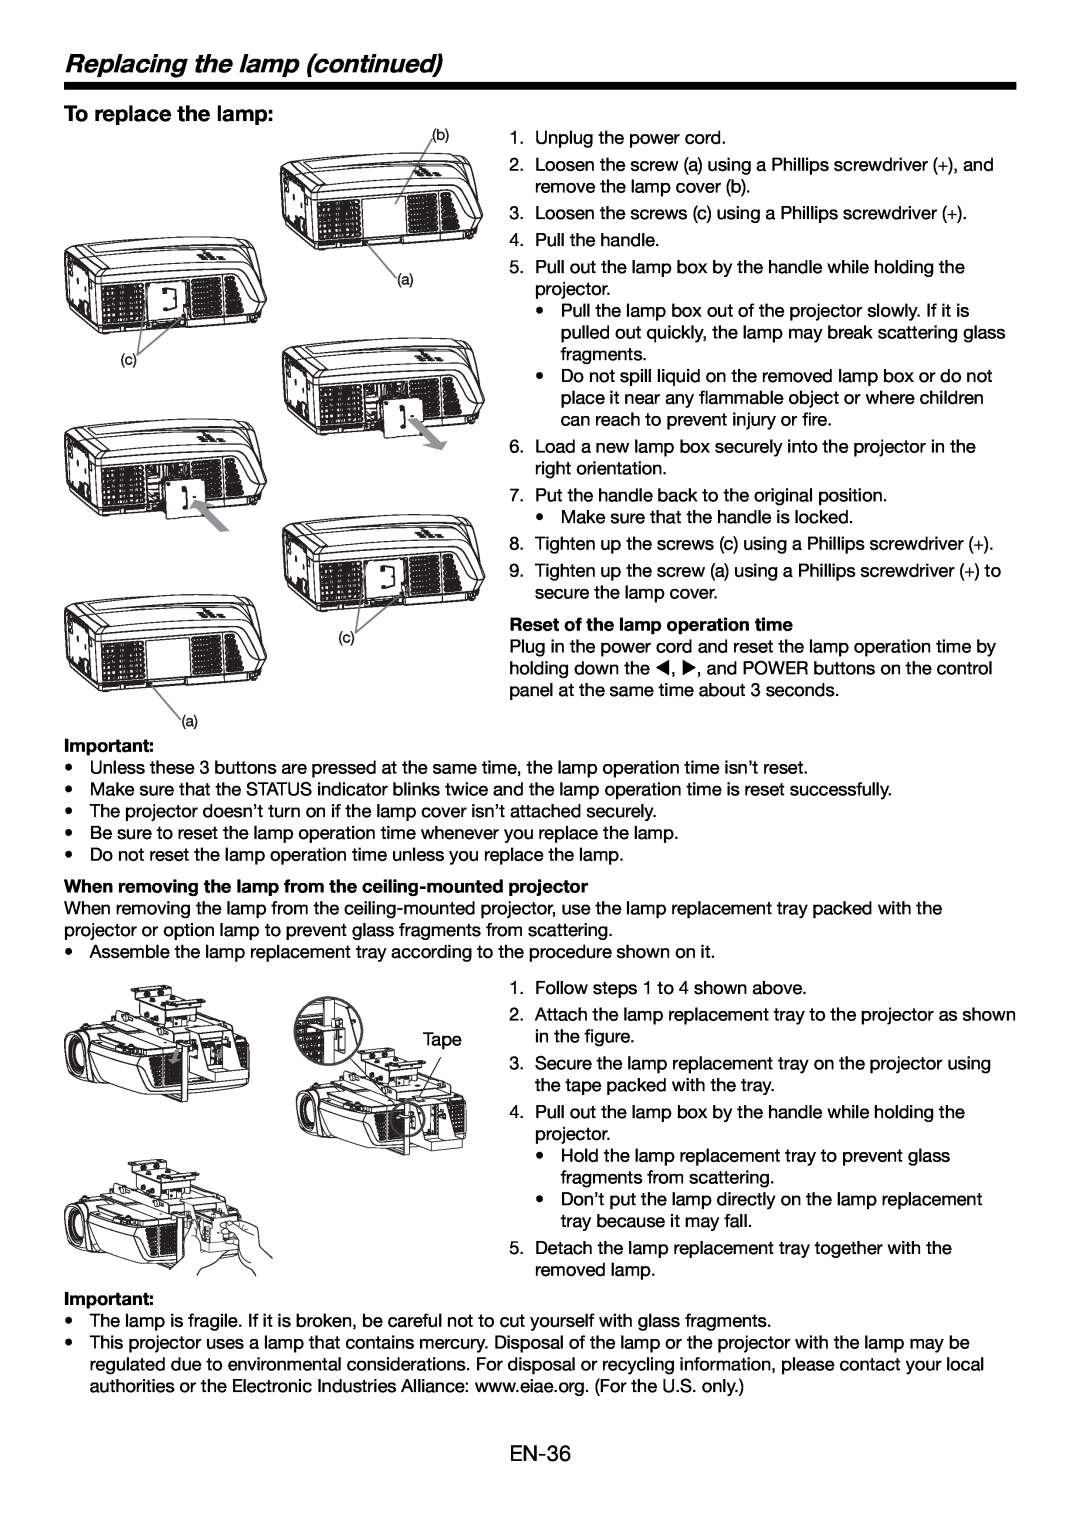 Mitsubishi Electronics HC4900 user manual Replacing the lamp continued, To replace the lamp, fragments 